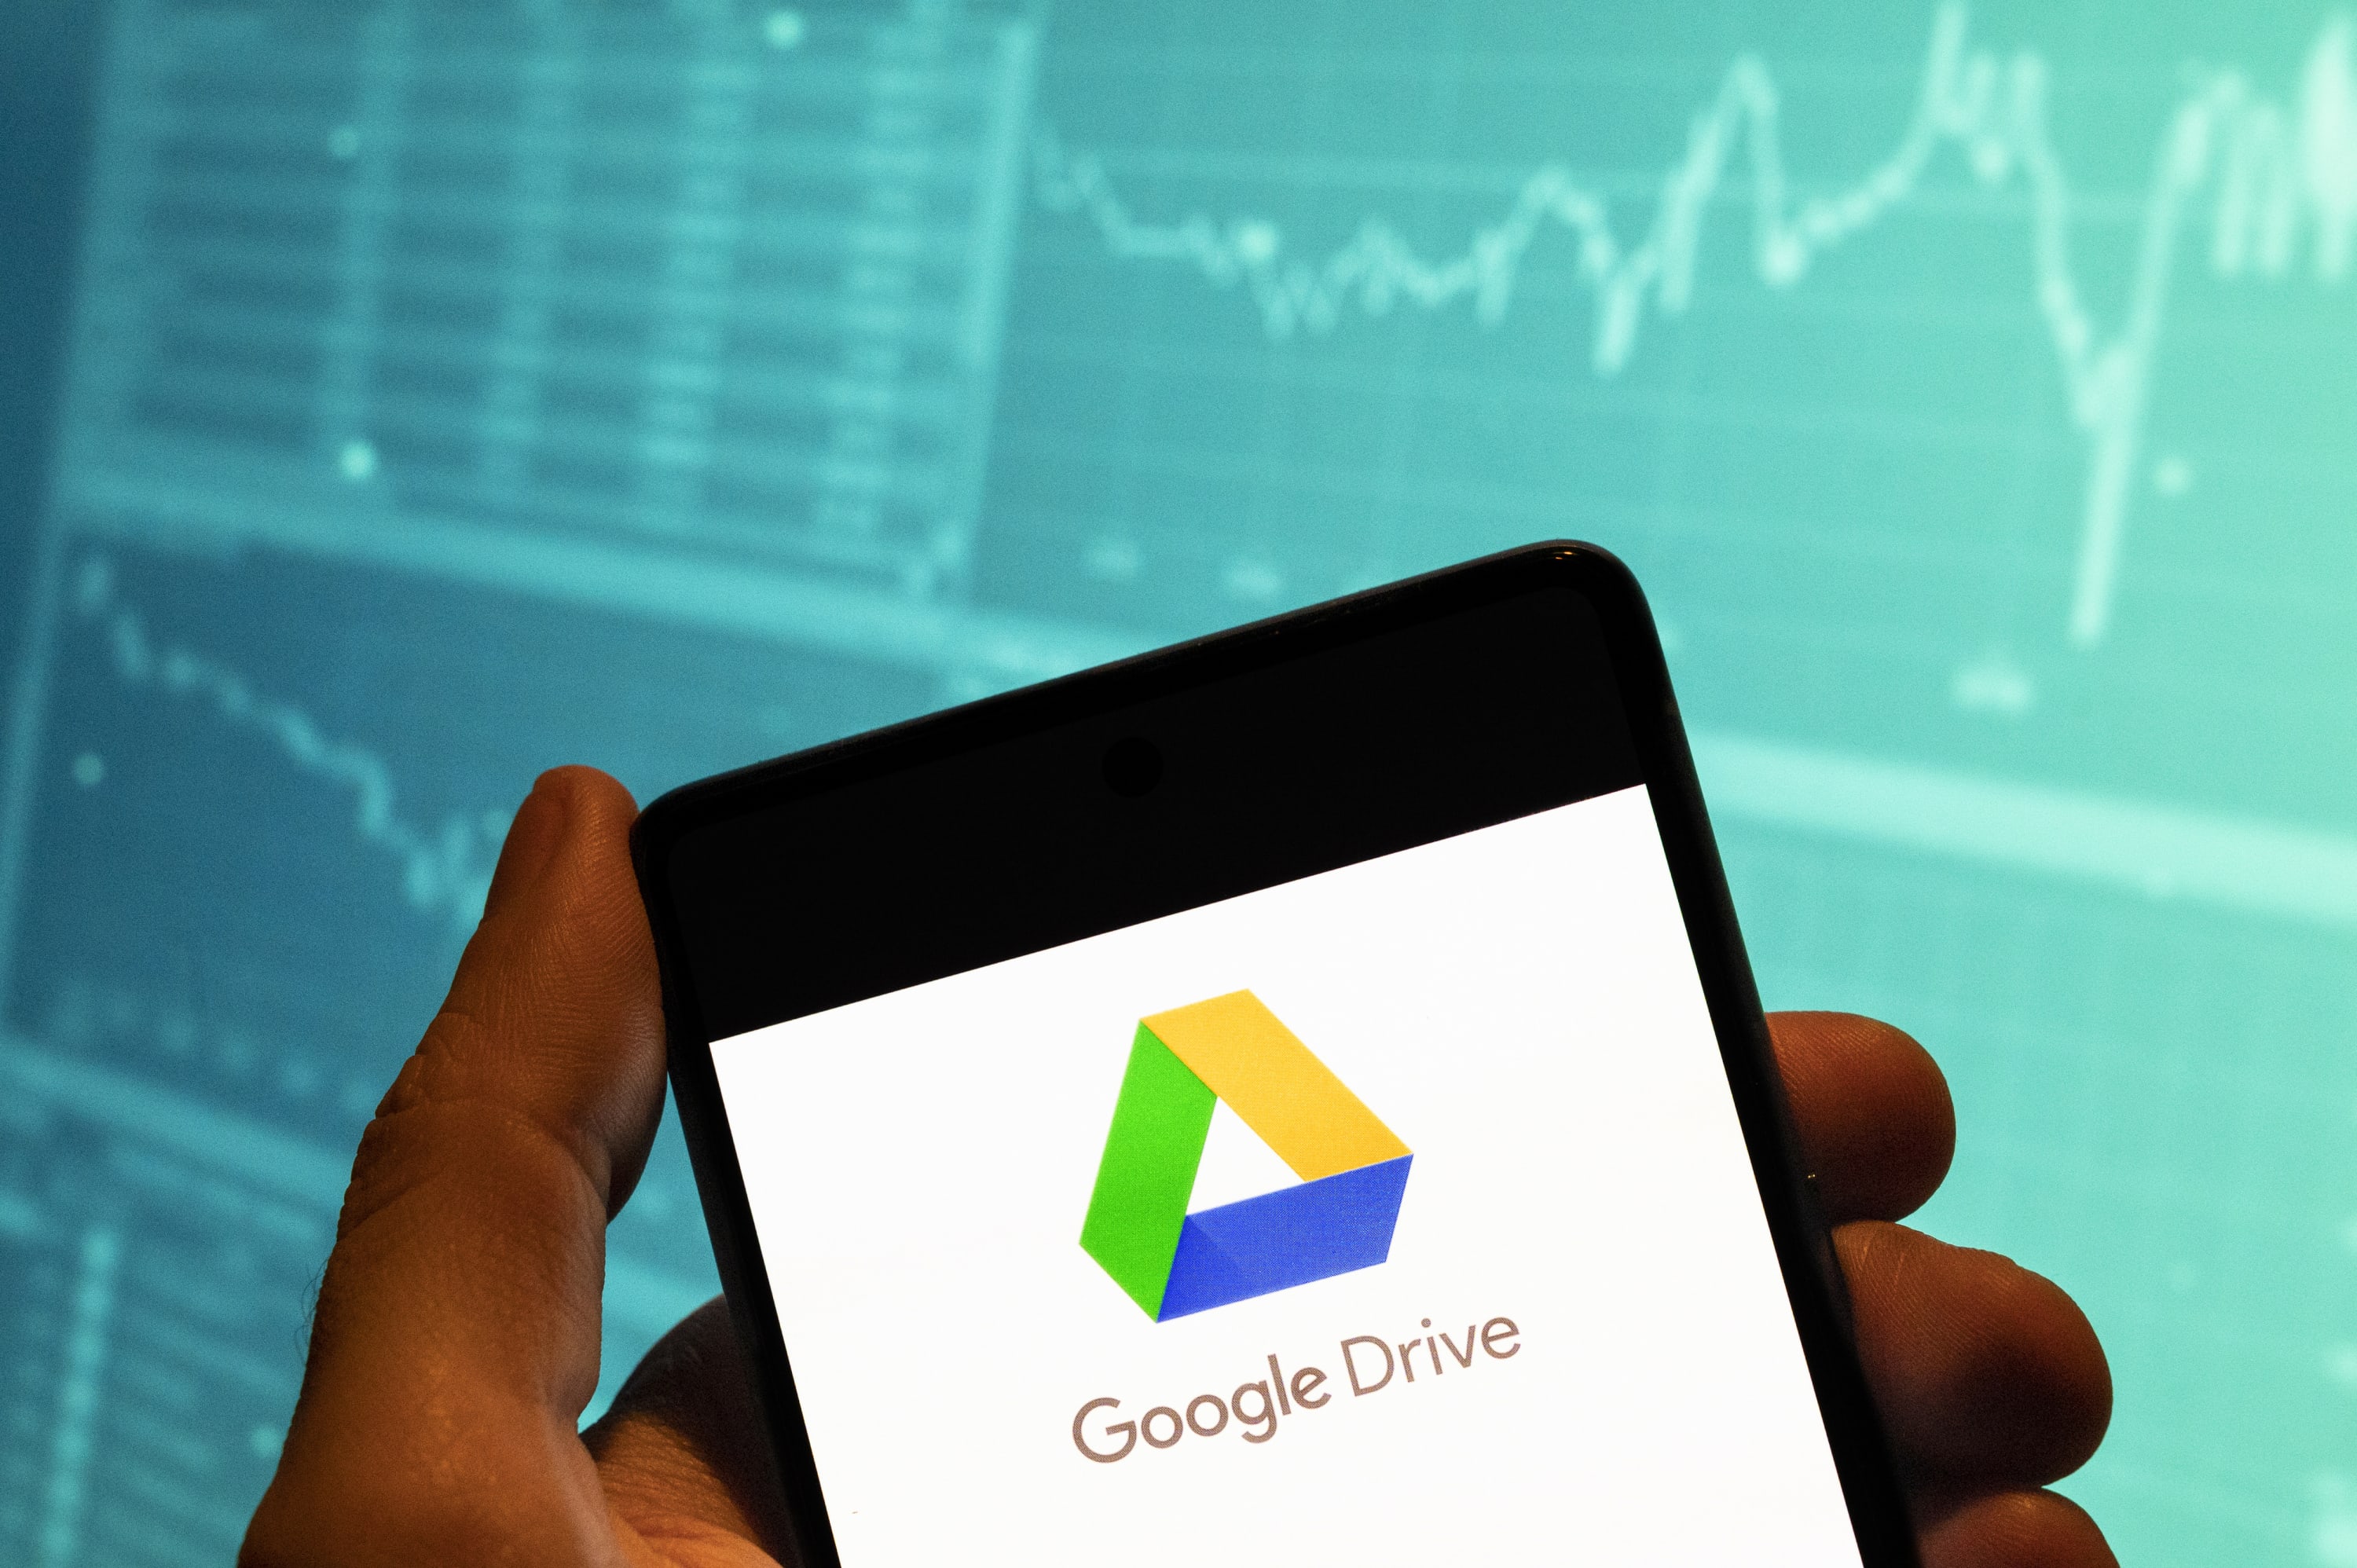 Google is investigating a Drive issue that causes files to go missing